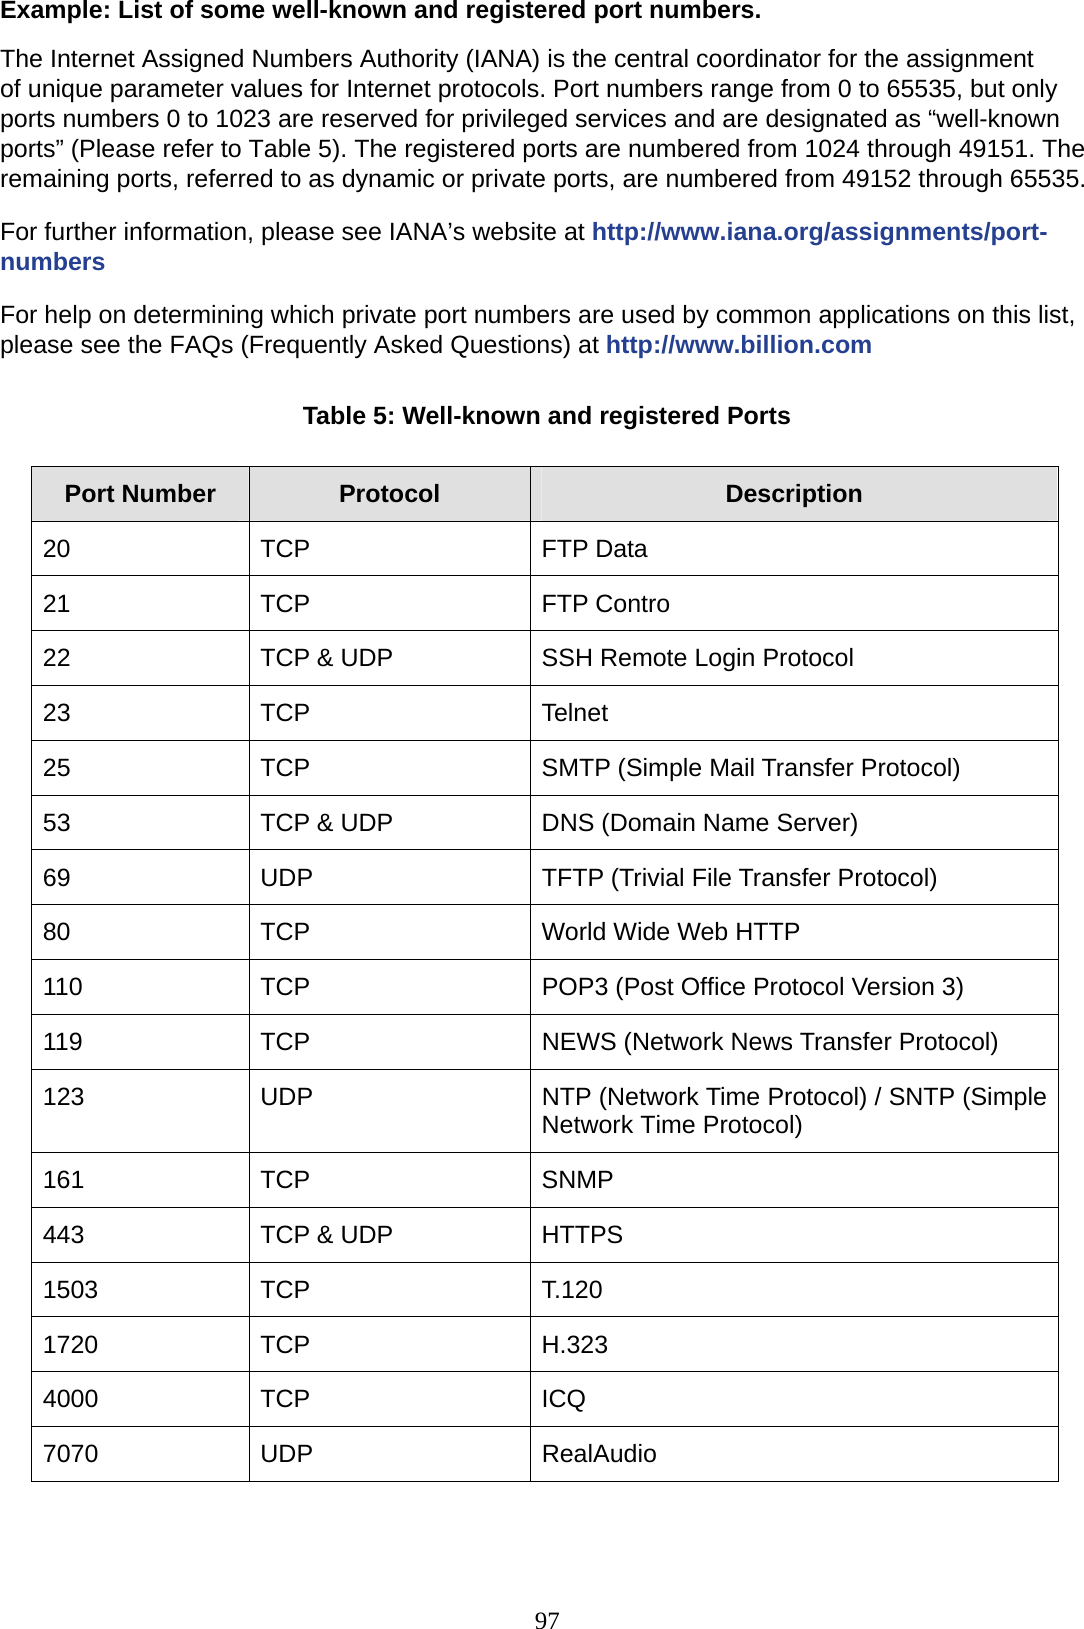 97 Example: List of some well-known and registered port numbers.  The Internet Assigned Numbers Authority (IANA) is the central coordinator for the assignment of unique parameter values for Internet protocols. Port numbers range from 0 to 65535, but only ports numbers 0 to 1023 are reserved for privileged services and are designated as “well-known ports” (Please refer to Table 5). The registered ports are numbered from 1024 through 49151. The remaining ports, referred to as dynamic or private ports, are numbered from 49152 through 65535.  For further information, please see IANA’s website at http://www.iana.org/assignments/port- numbers  For help on determining which private port numbers are used by common applications on this list, please see the FAQs (Frequently Asked Questions) at http://www.billion.com   Table 5: Well-known and registered Ports   Port Number  Protocol  Description 20 TCP  FTP Data 21 TCP  FTP Contro 22  TCP &amp; UDP  SSH Remote Login Protocol 23 TCP  Telnet 25  TCP  SMTP (Simple Mail Transfer Protocol) 53  TCP &amp; UDP  DNS (Domain Name Server) 69  UDP  TFTP (Trivial File Transfer Protocol) 80  TCP  World Wide Web HTTP 110  TCP  POP3 (Post Office Protocol Version 3) 119  TCP  NEWS (Network News Transfer Protocol) 123  UDP  NTP (Network Time Protocol) / SNTP (Simple Network Time Protocol) 161 TCP  SNMP 443 TCP &amp; UDP HTTPS 1503 TCP  T.120 1720 TCP  H.323 4000 TCP  ICQ 7070 UDP  RealAudio 